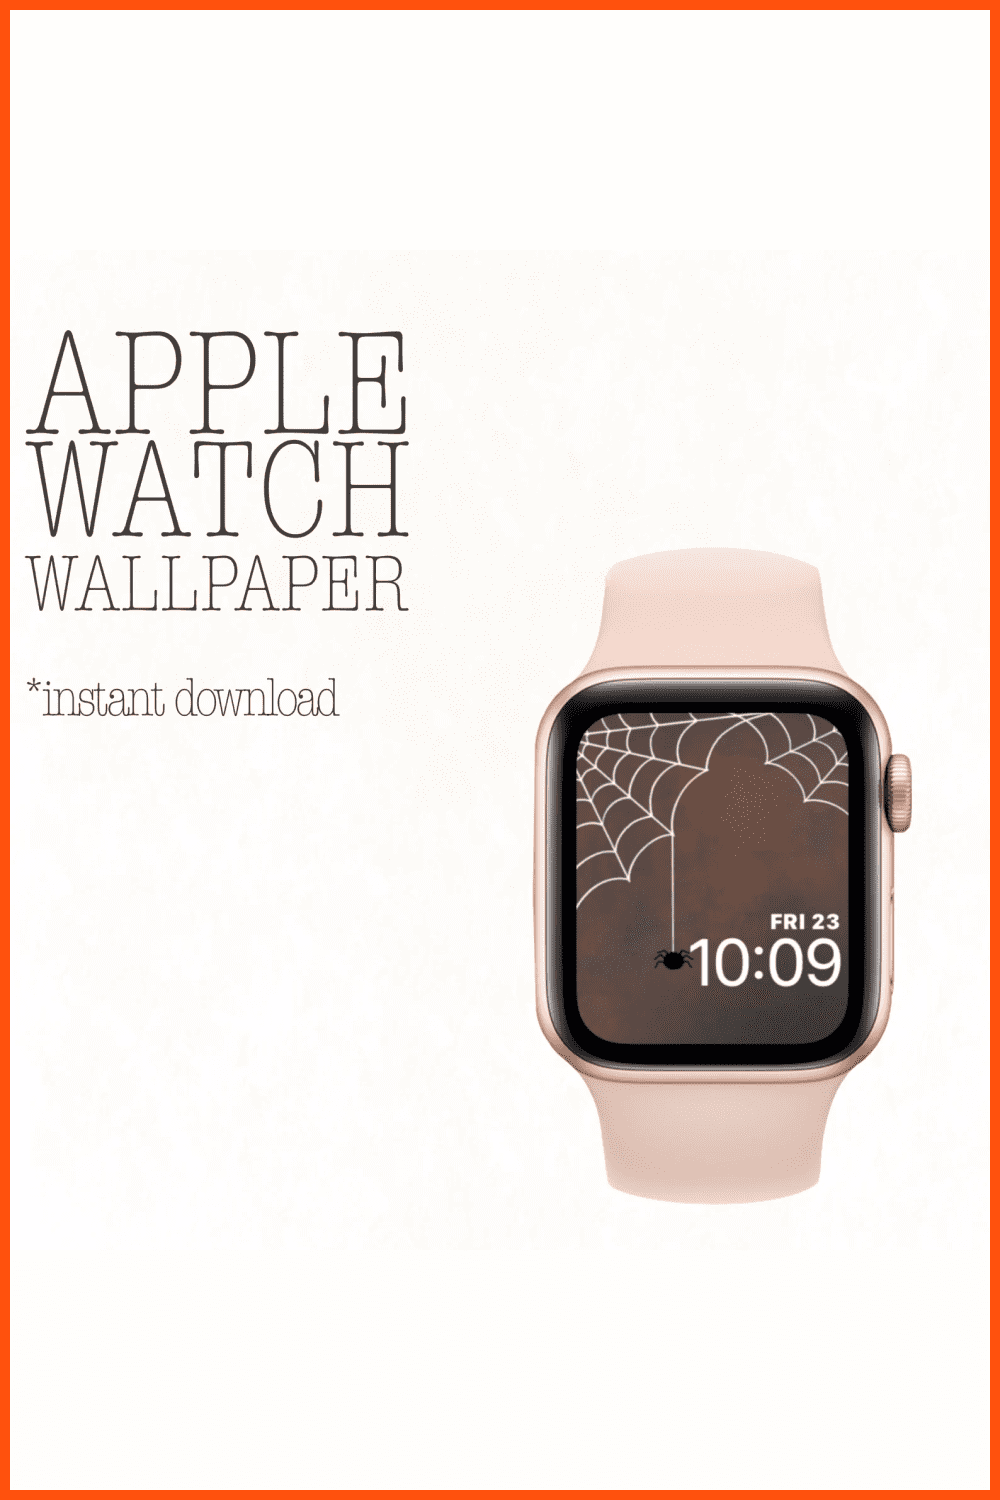 Apple watch with little spider and web on face.